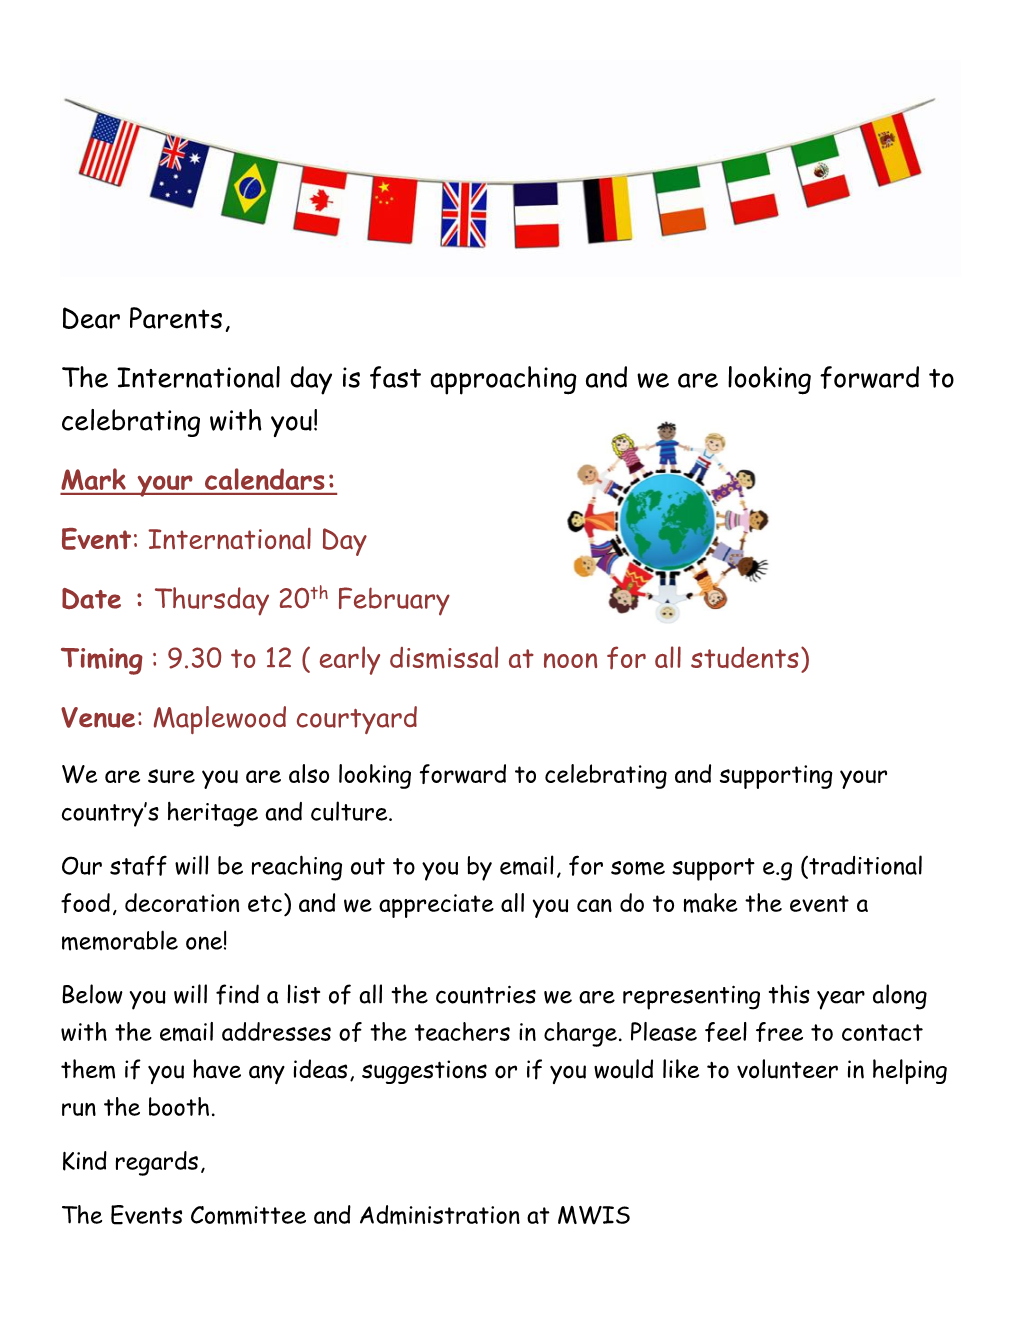 Dear Parents, the International Day Is Fast Approaching and We Are